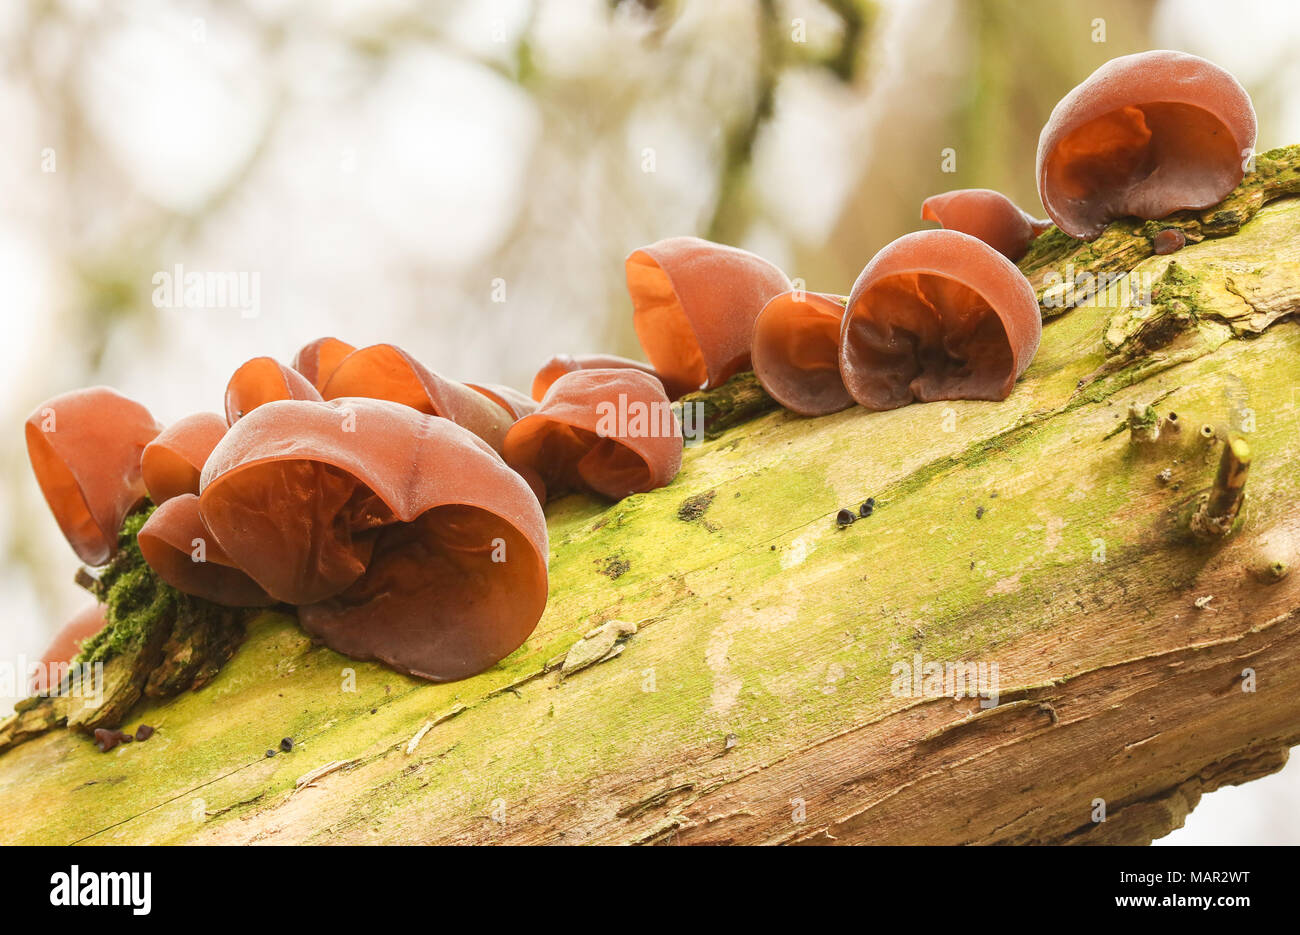 A group of Jew's Ear Fungi (Auricularia auricula-judae) growing on a tree. Stock Photo